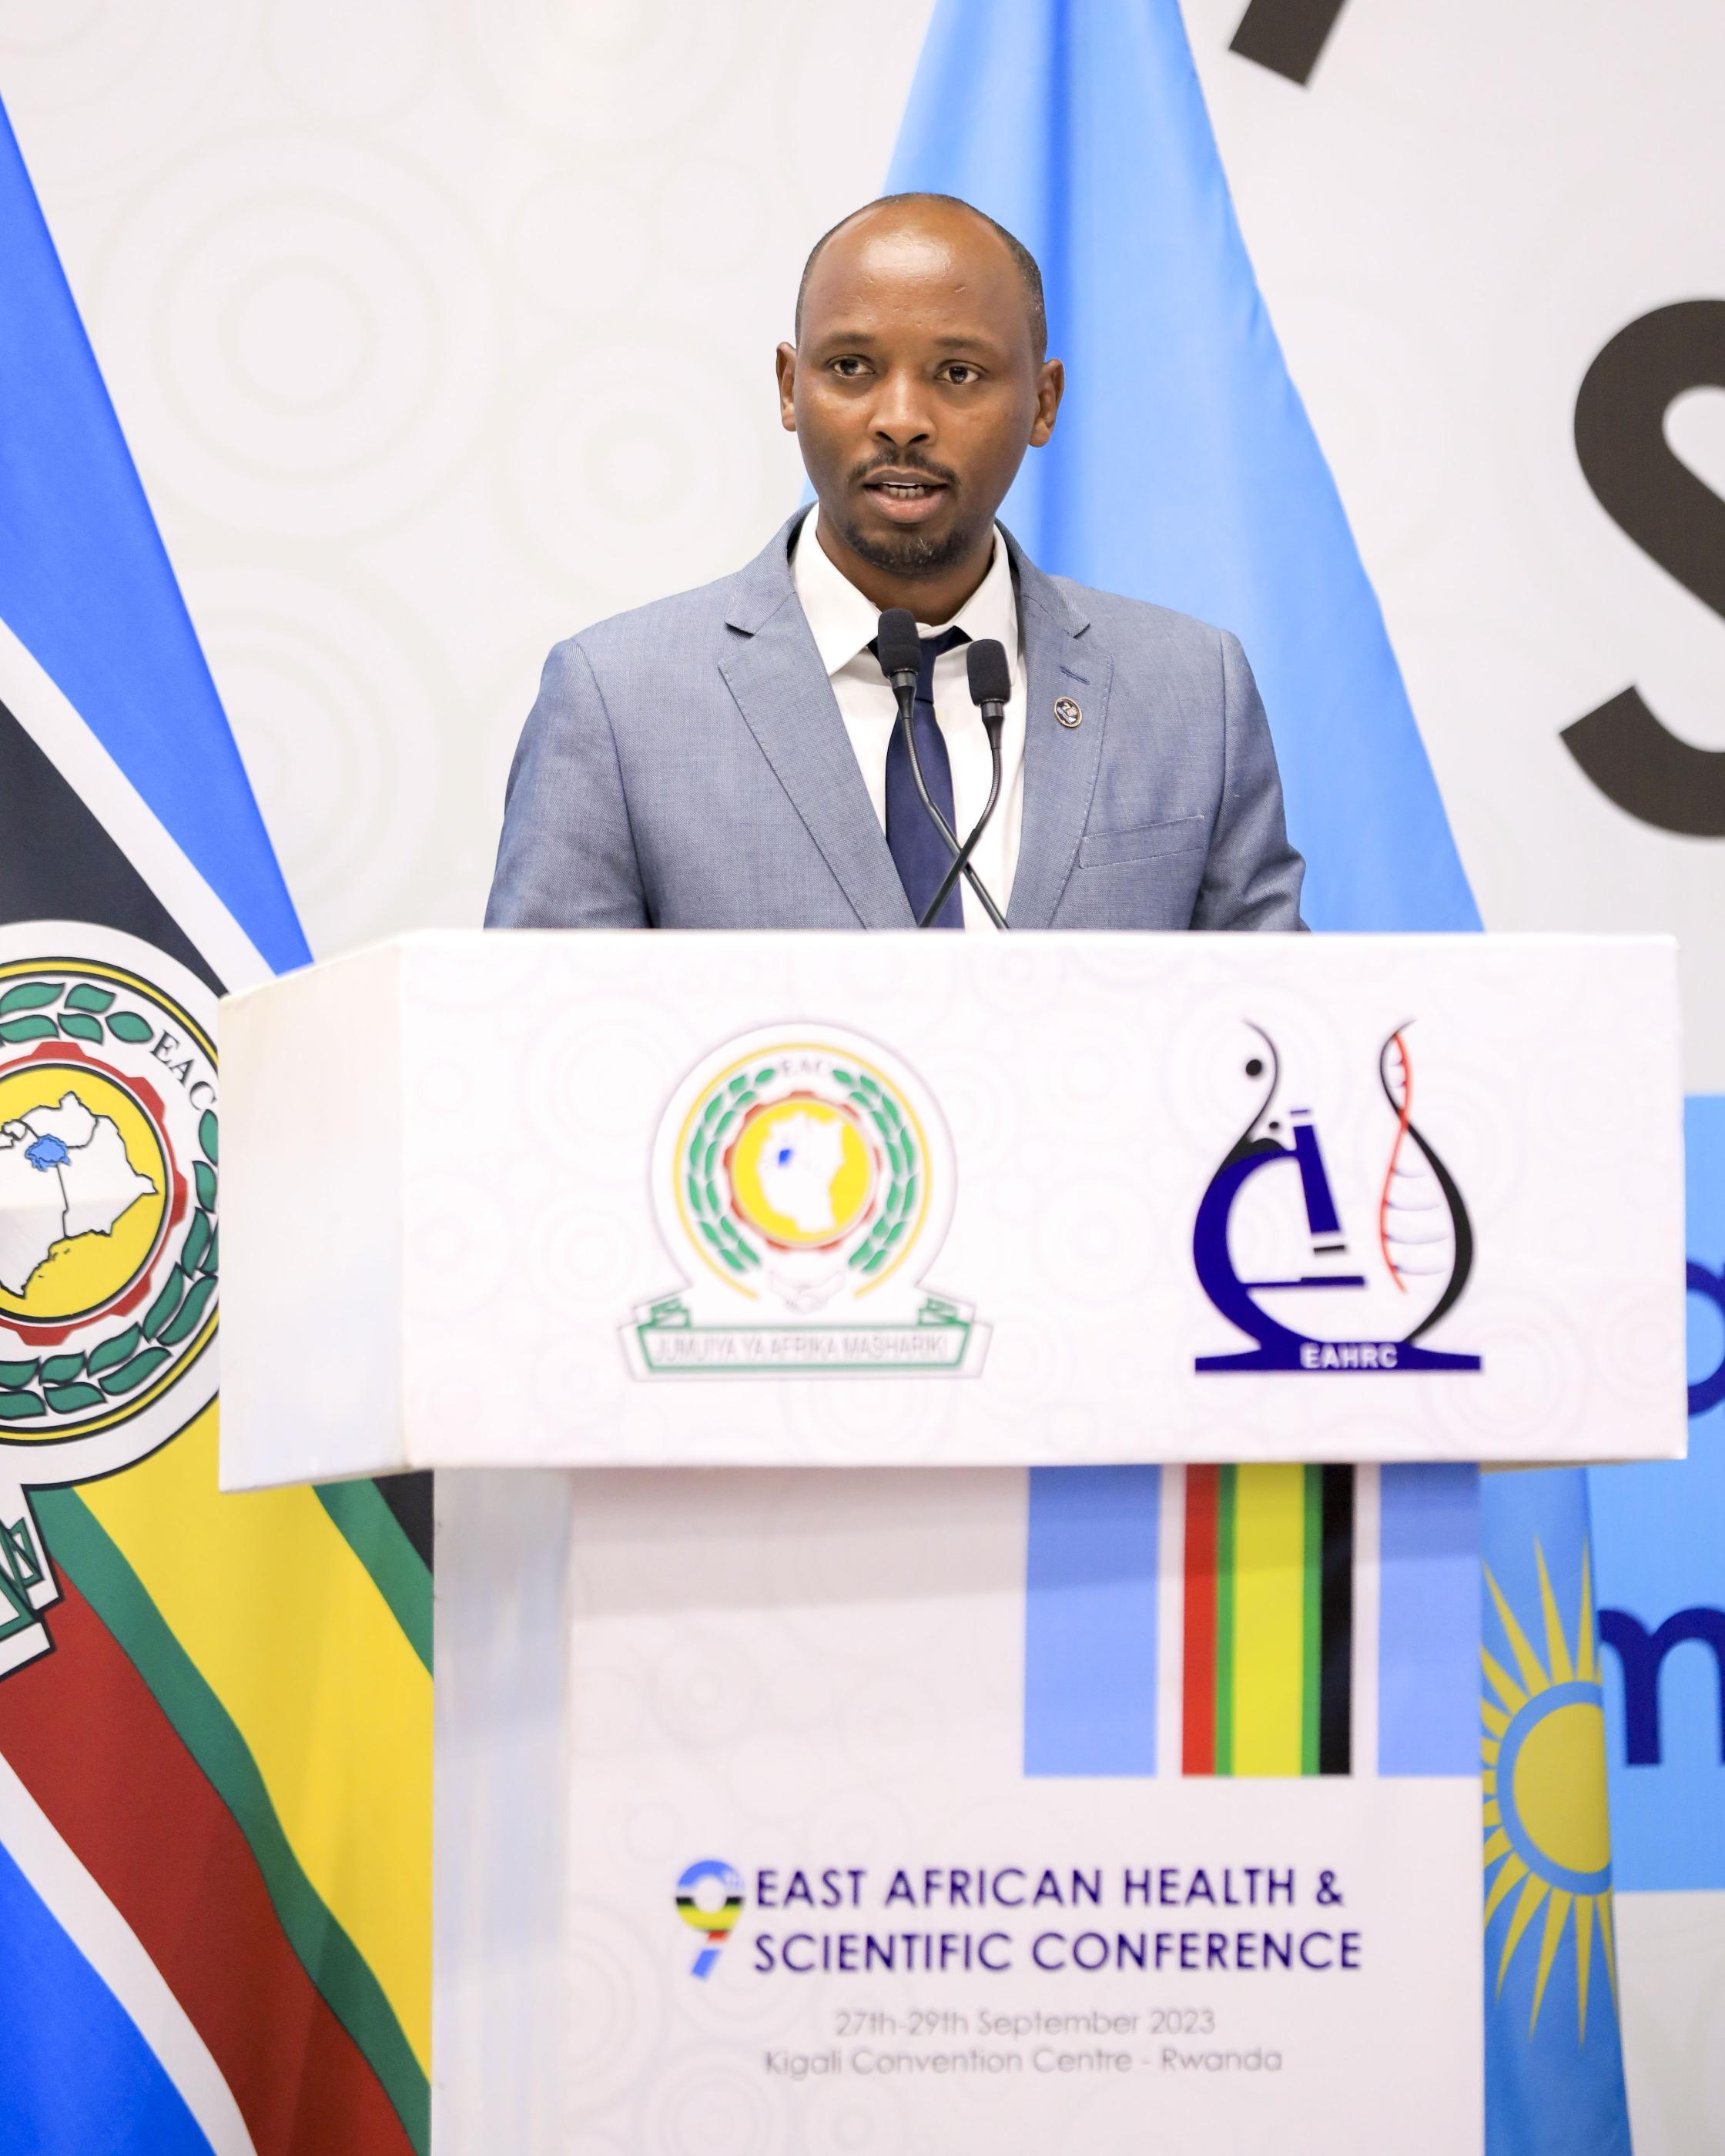  Rwanda’s Minister of Health, Dr. Sabin Nsanzimana, addresses delegates when he officially opened the 9th East African Health and Scientific Conference at the Kigali Convention Centre in Kigali.